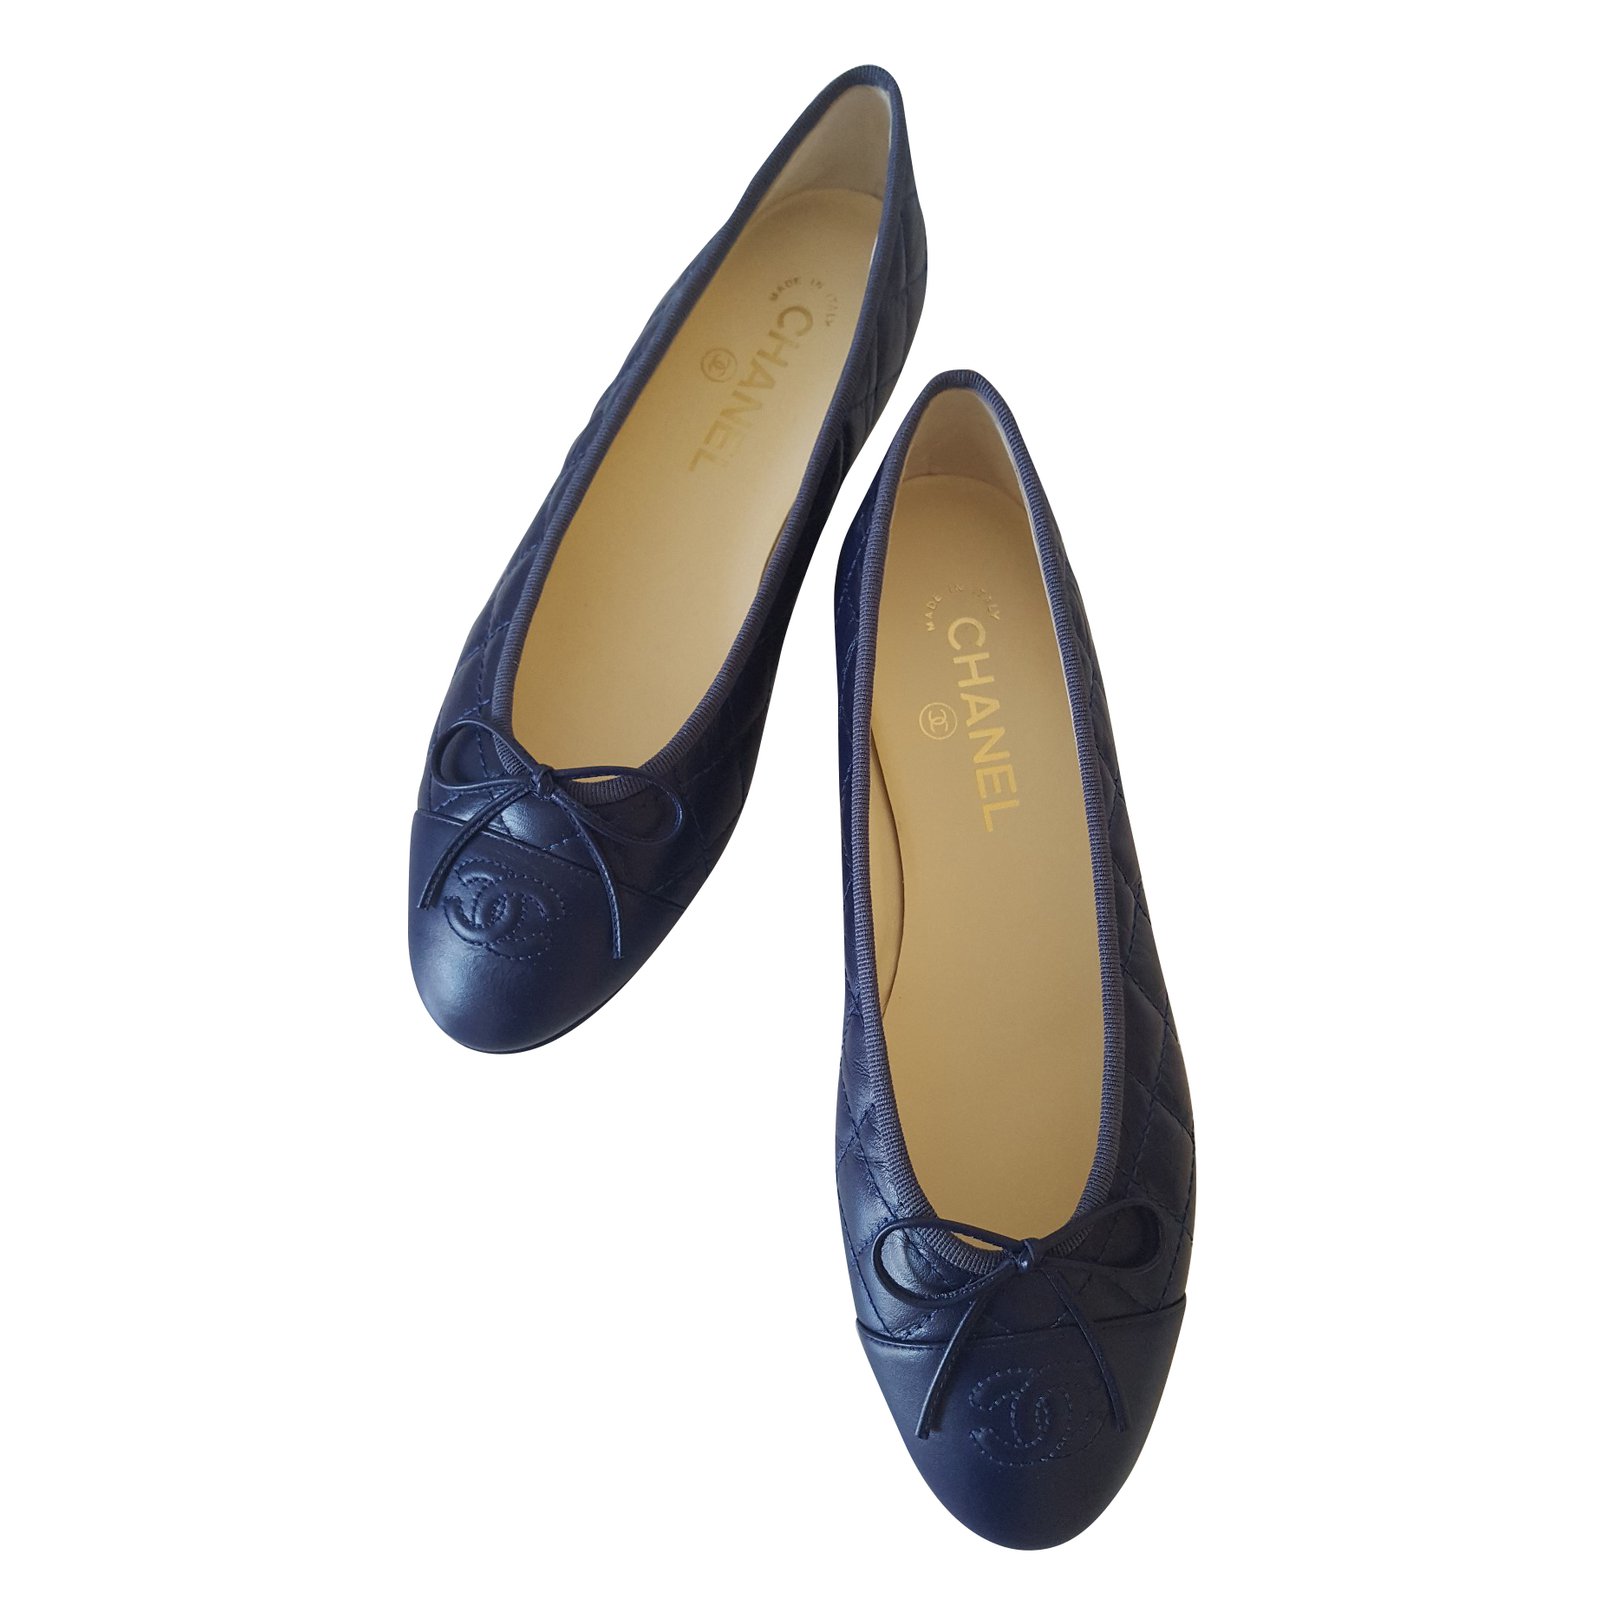 Leather ballet flats Chanel Blue size 38.5 EU in Leather - 25194007